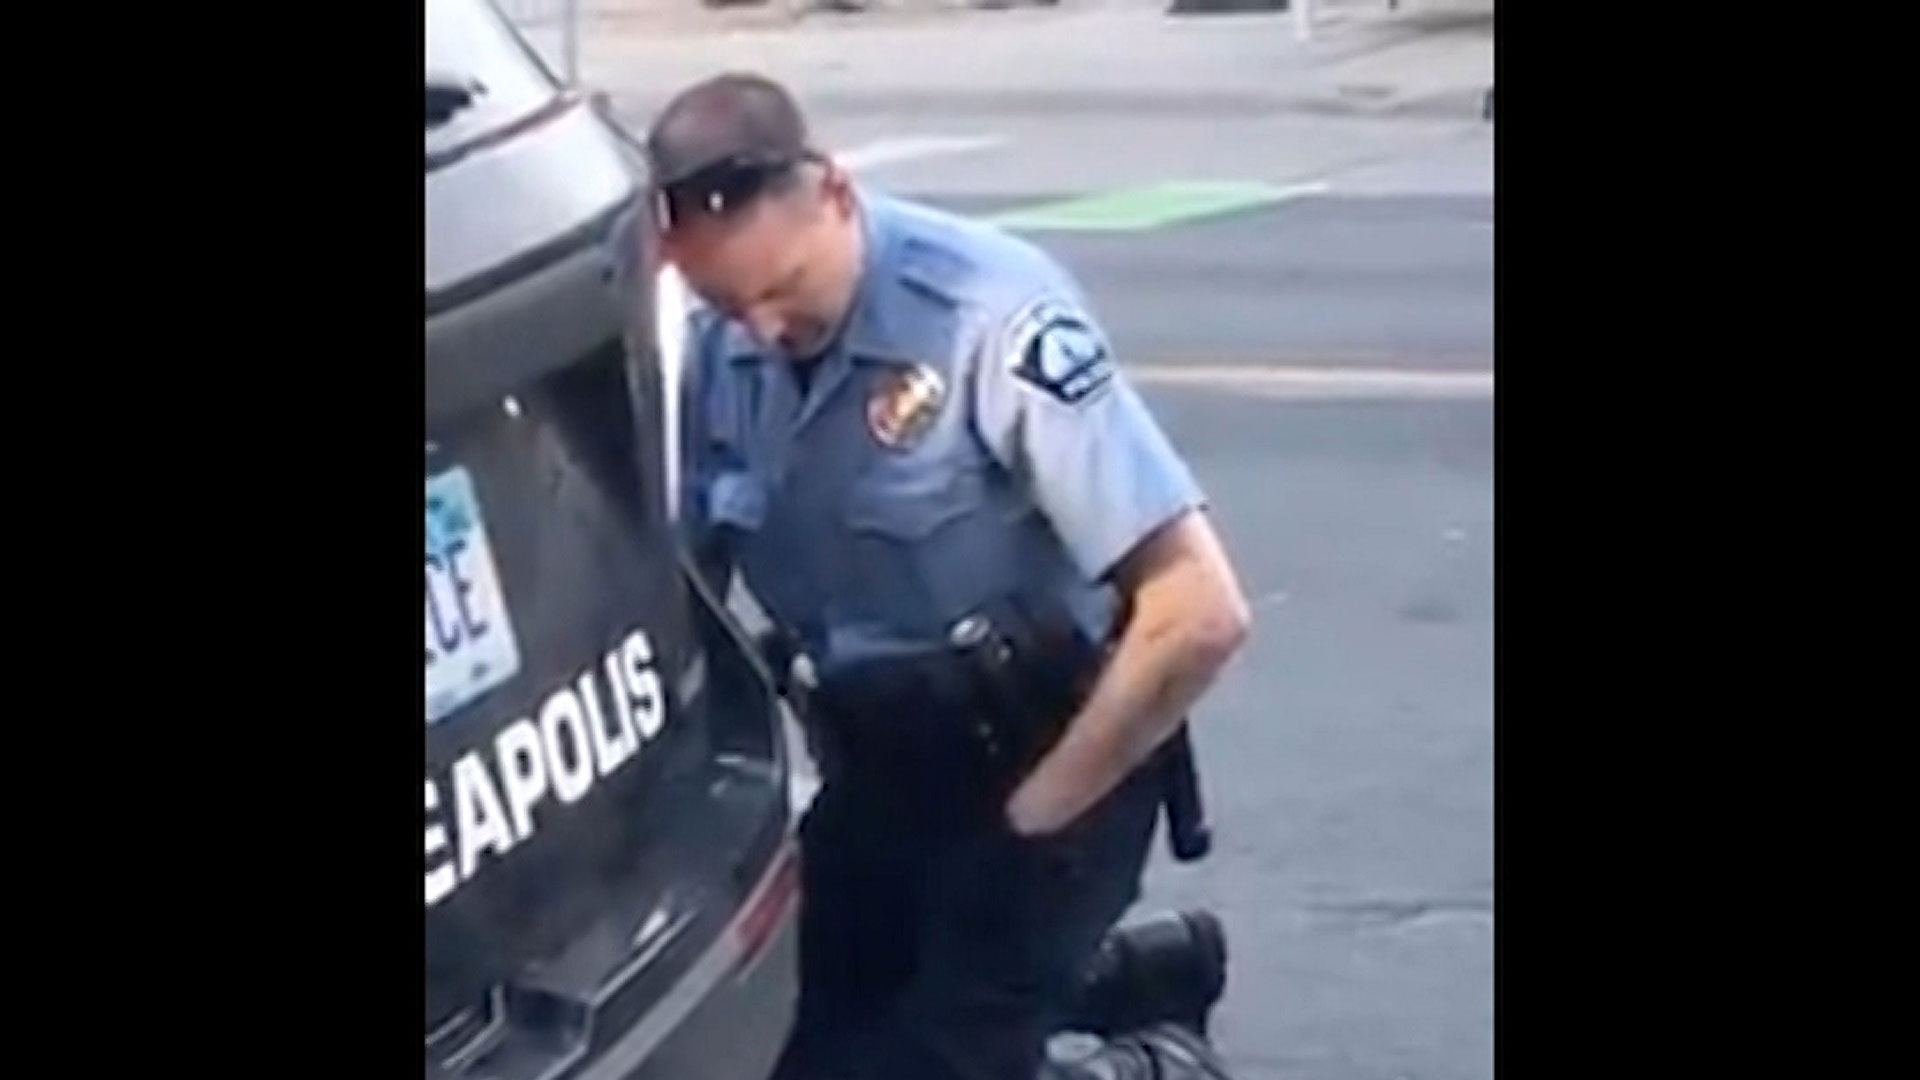 Thumbnail for the video titled "Officer from Floyd incident taken into custody"